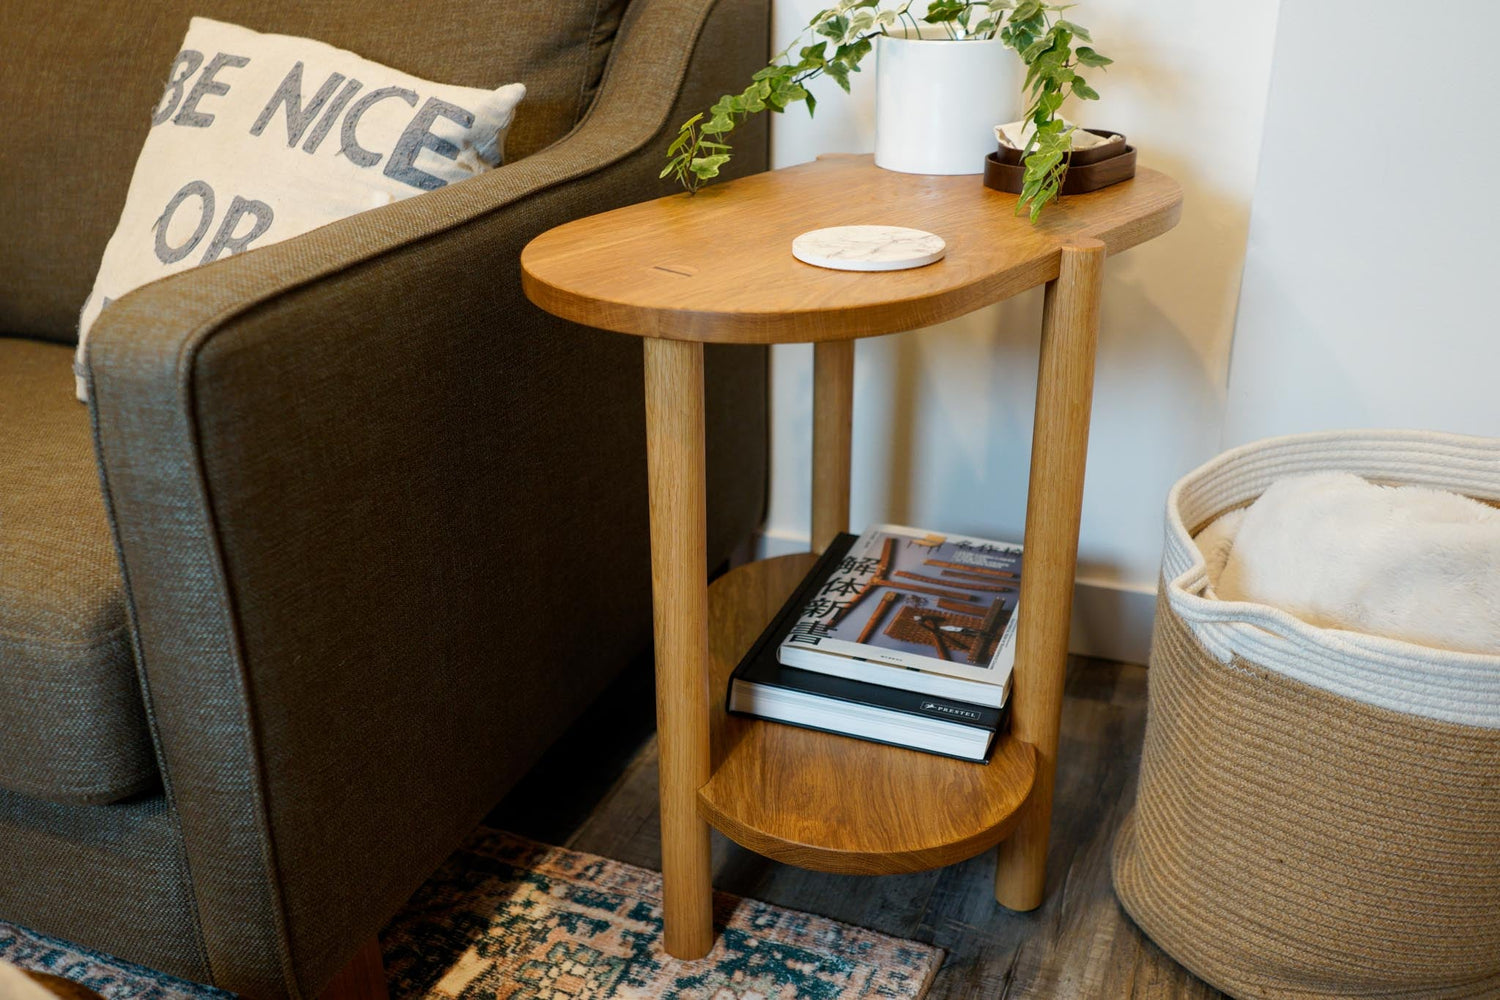 The Beside Table, by Biglow Woodcraft; a wooden table with a book, a plant and a coaster. Between a sofa and a basket. Hardwood White Oak